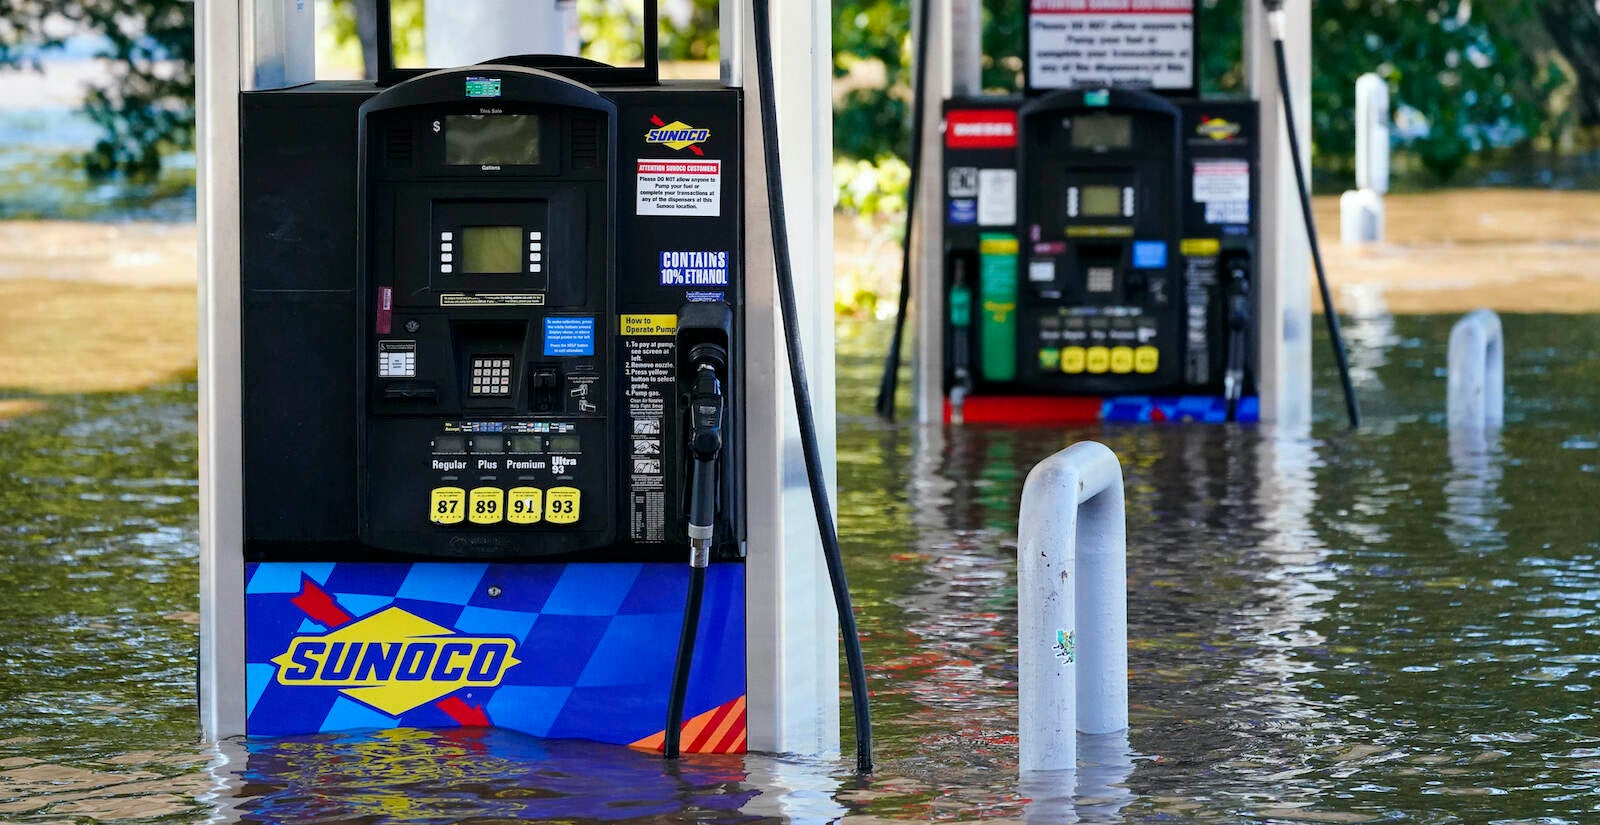 Gas pumps are submerged in water